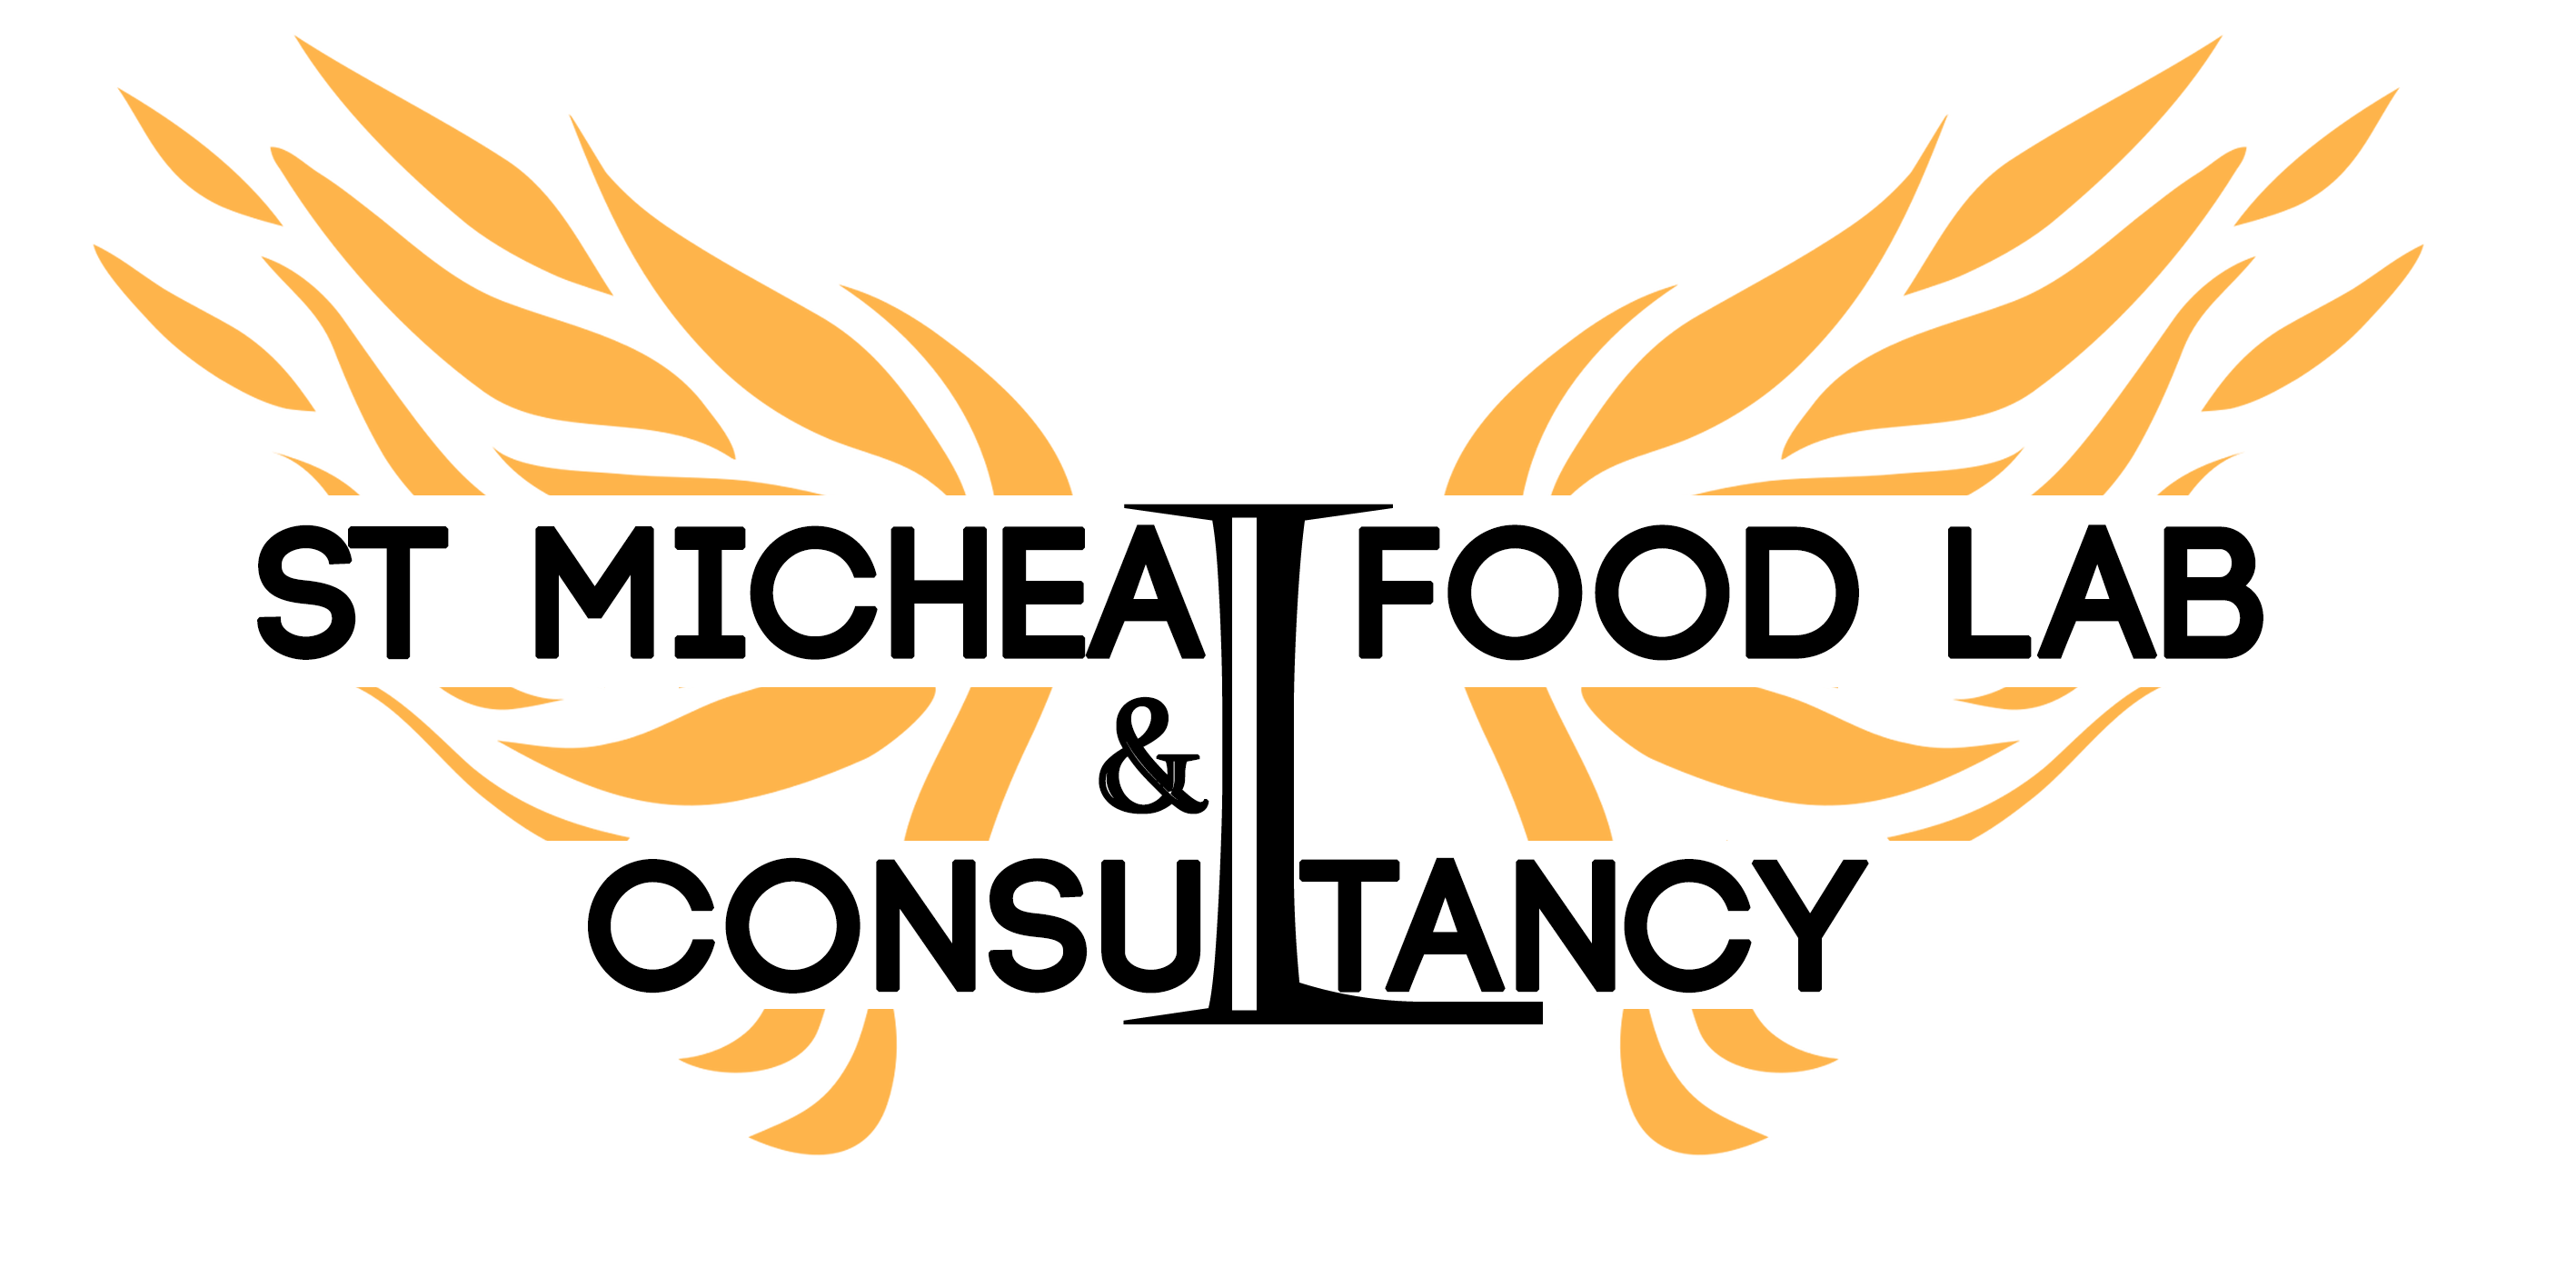 ST MICHEAL FOOD LAB AND CONSULTANCY LTD